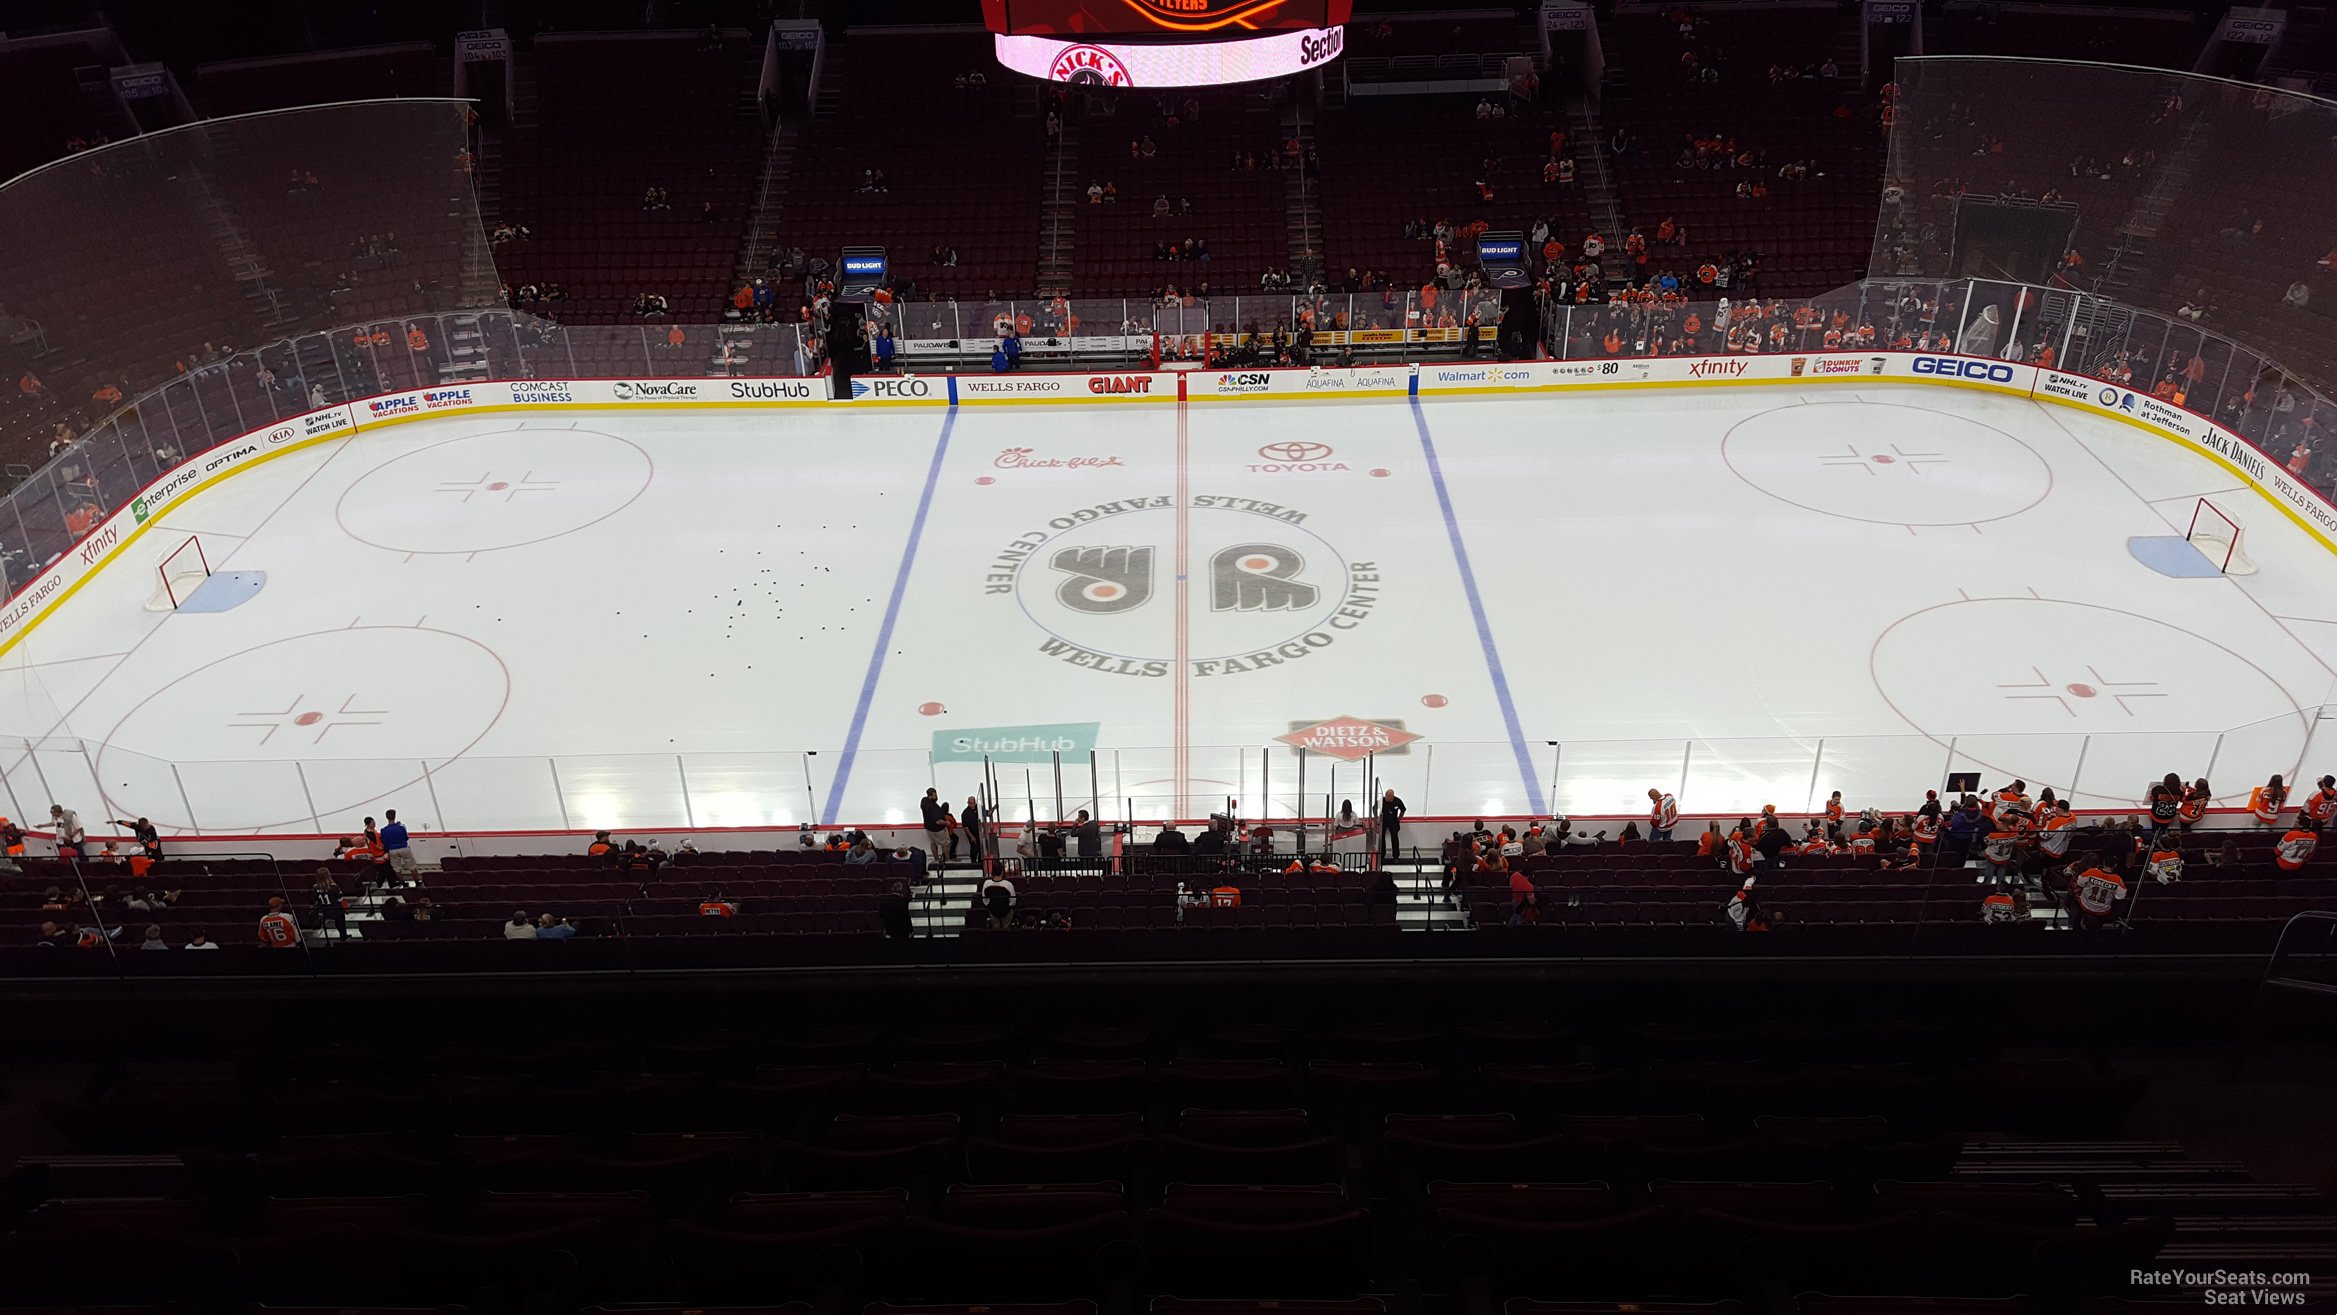 section 213, row 8 seat view  for hockey - wells fargo center